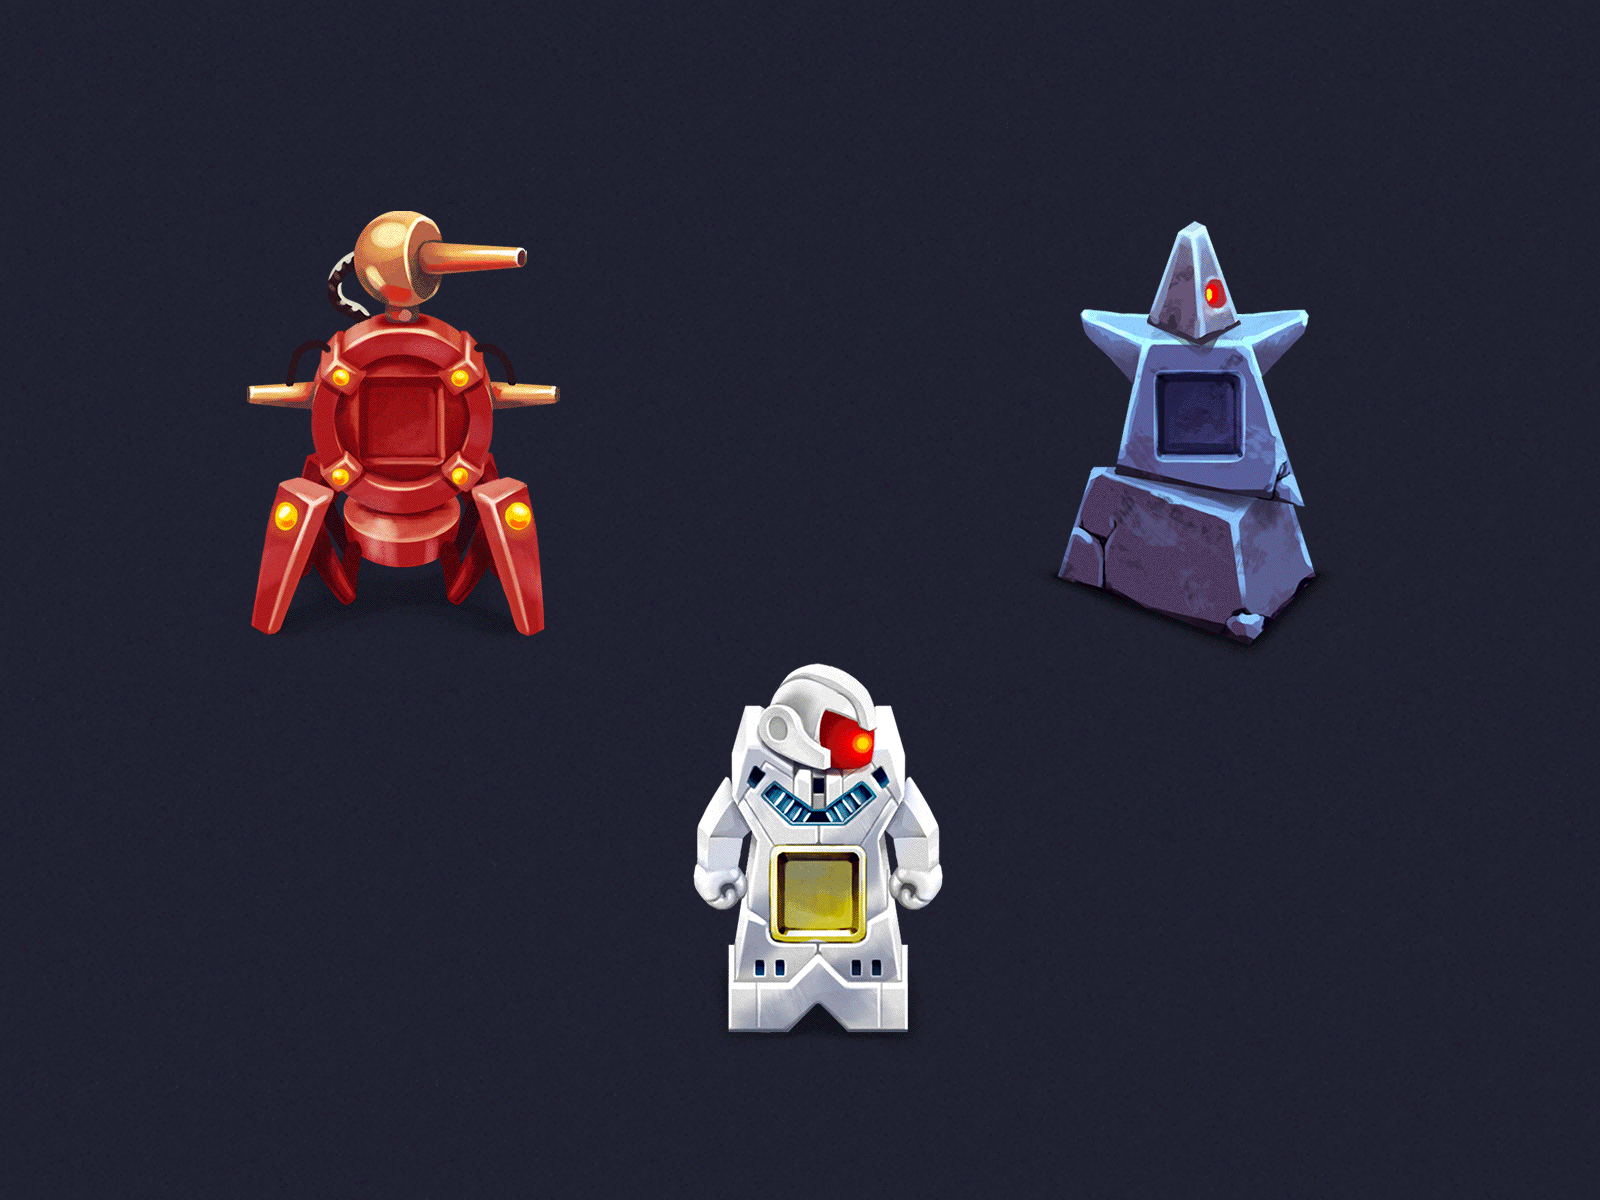 Turrets for an indie fantasy top-down RPG game. Part II defence design game game art game artist illustration indie offence robot rpg sorceress top down tower turret witch